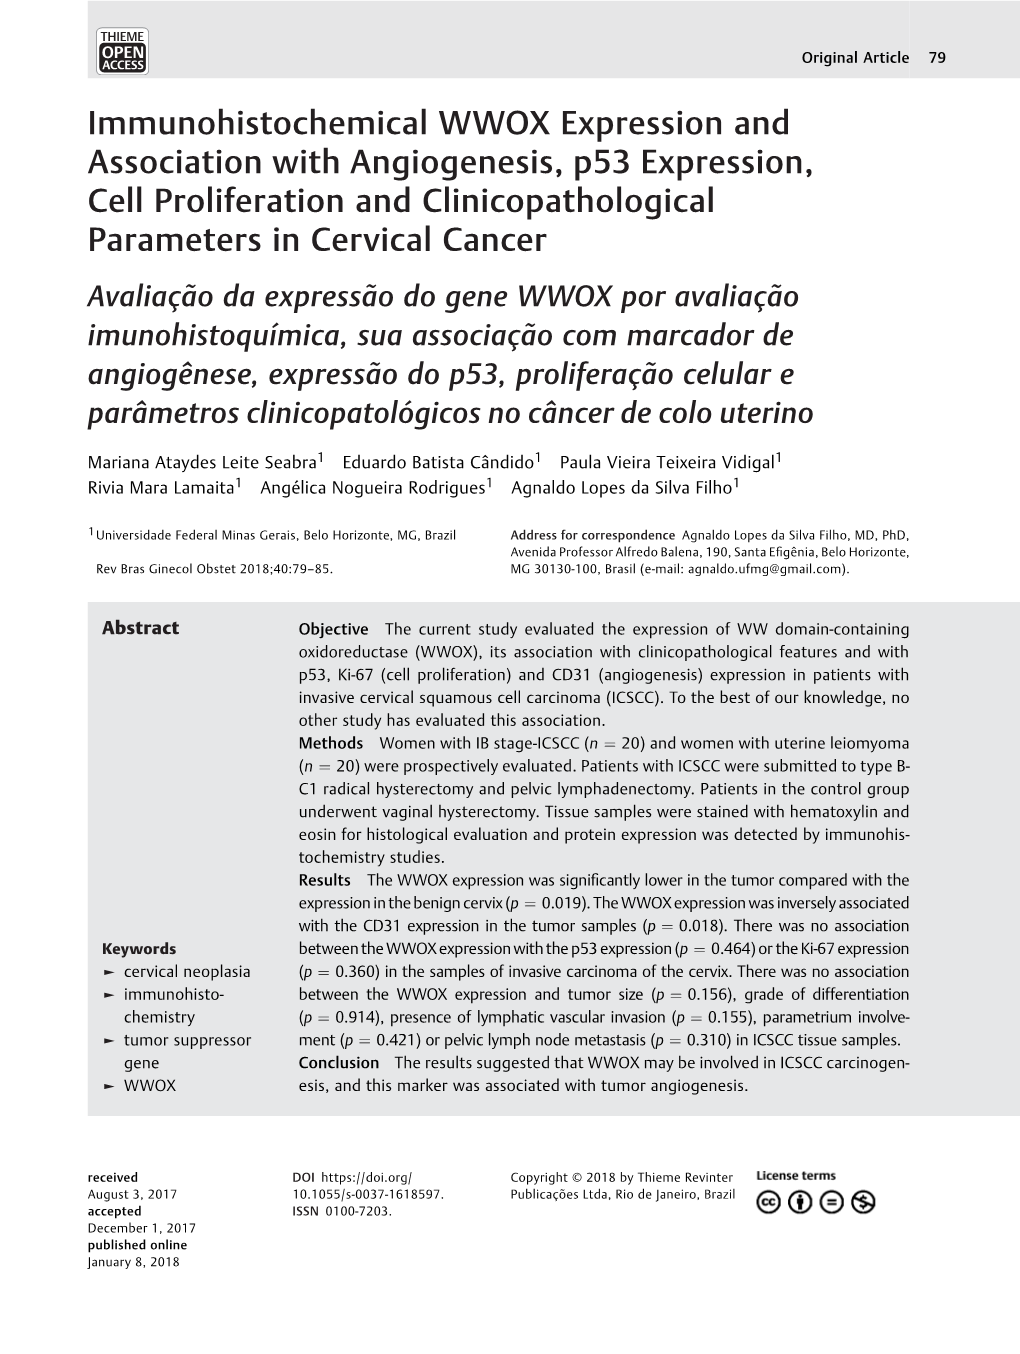 Immunohistochemical WWOX Expression and Association with Angiogenesis, P53 Expression, Cell Proliferation and Clinicopathologica